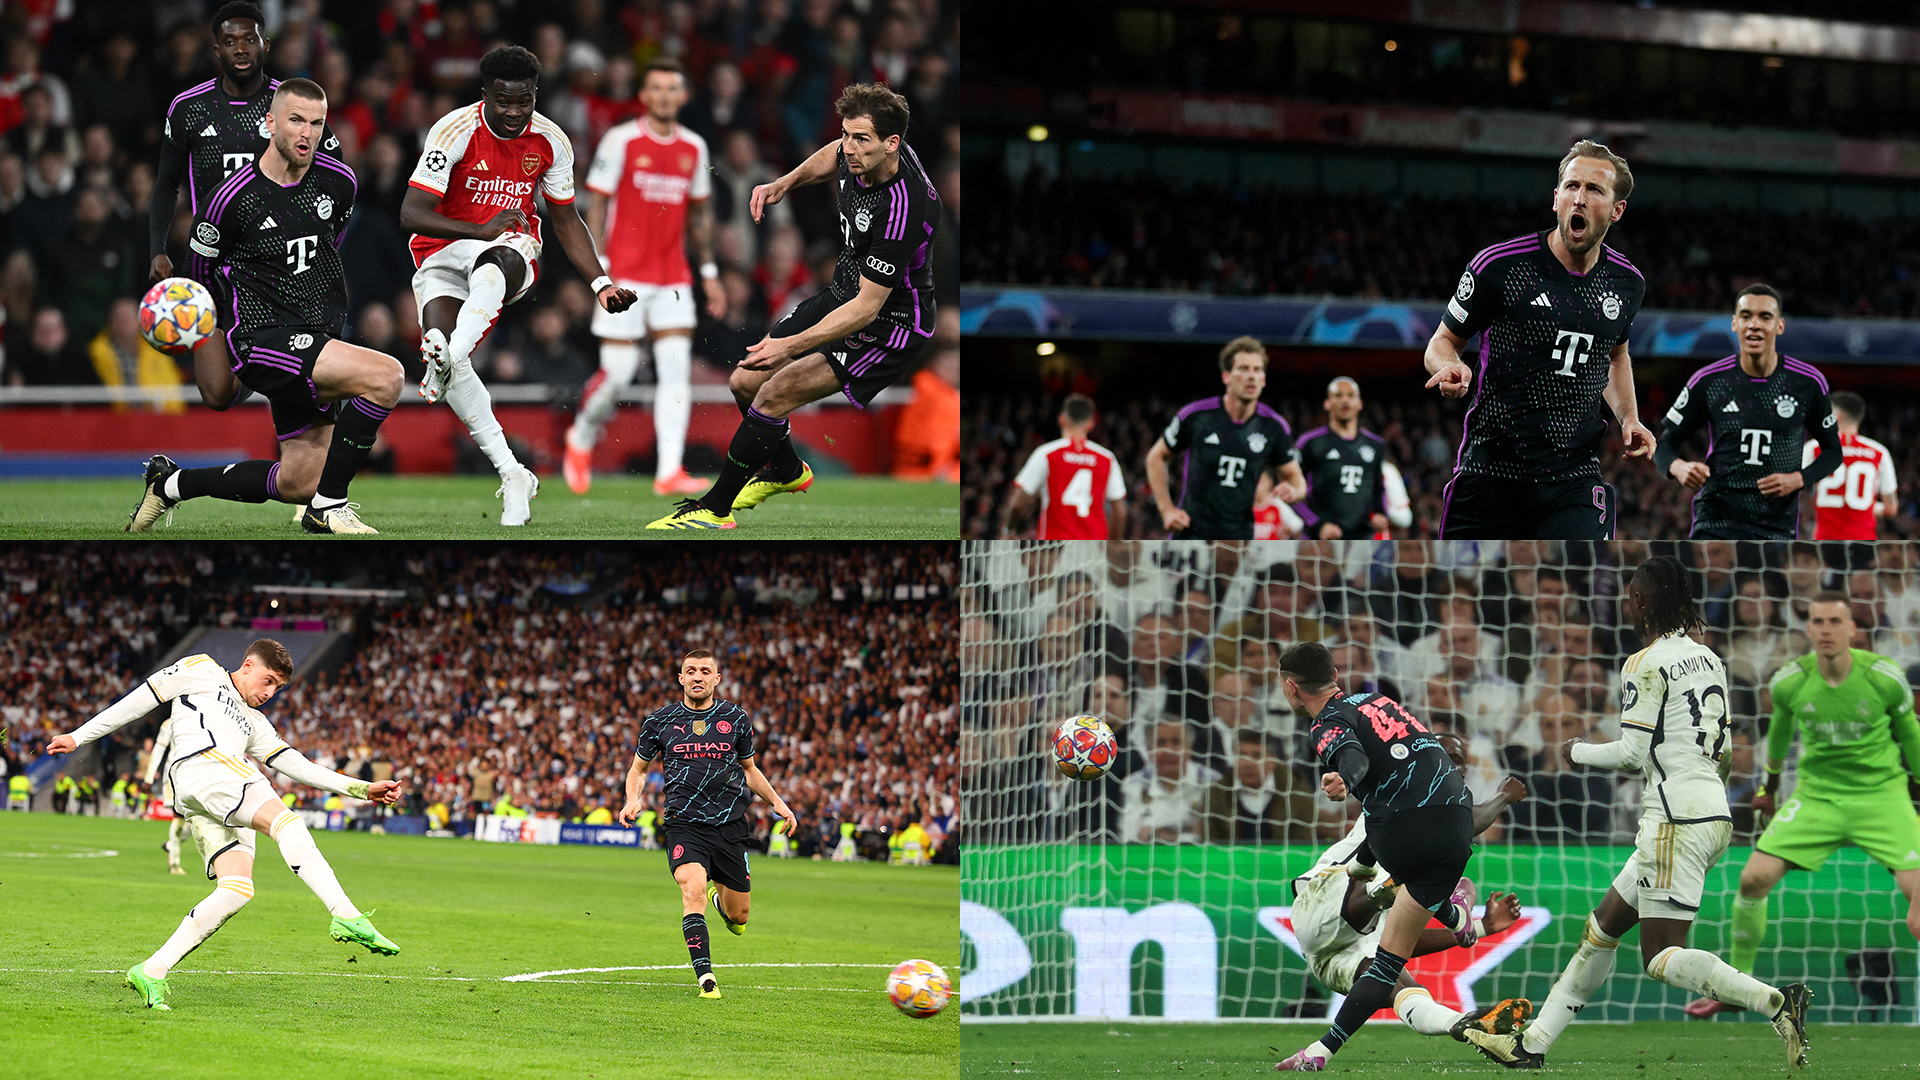 Arsenal, Bayern Munich, Real Madrid, and Manchester City score goals in their Champions League quarter-finals.